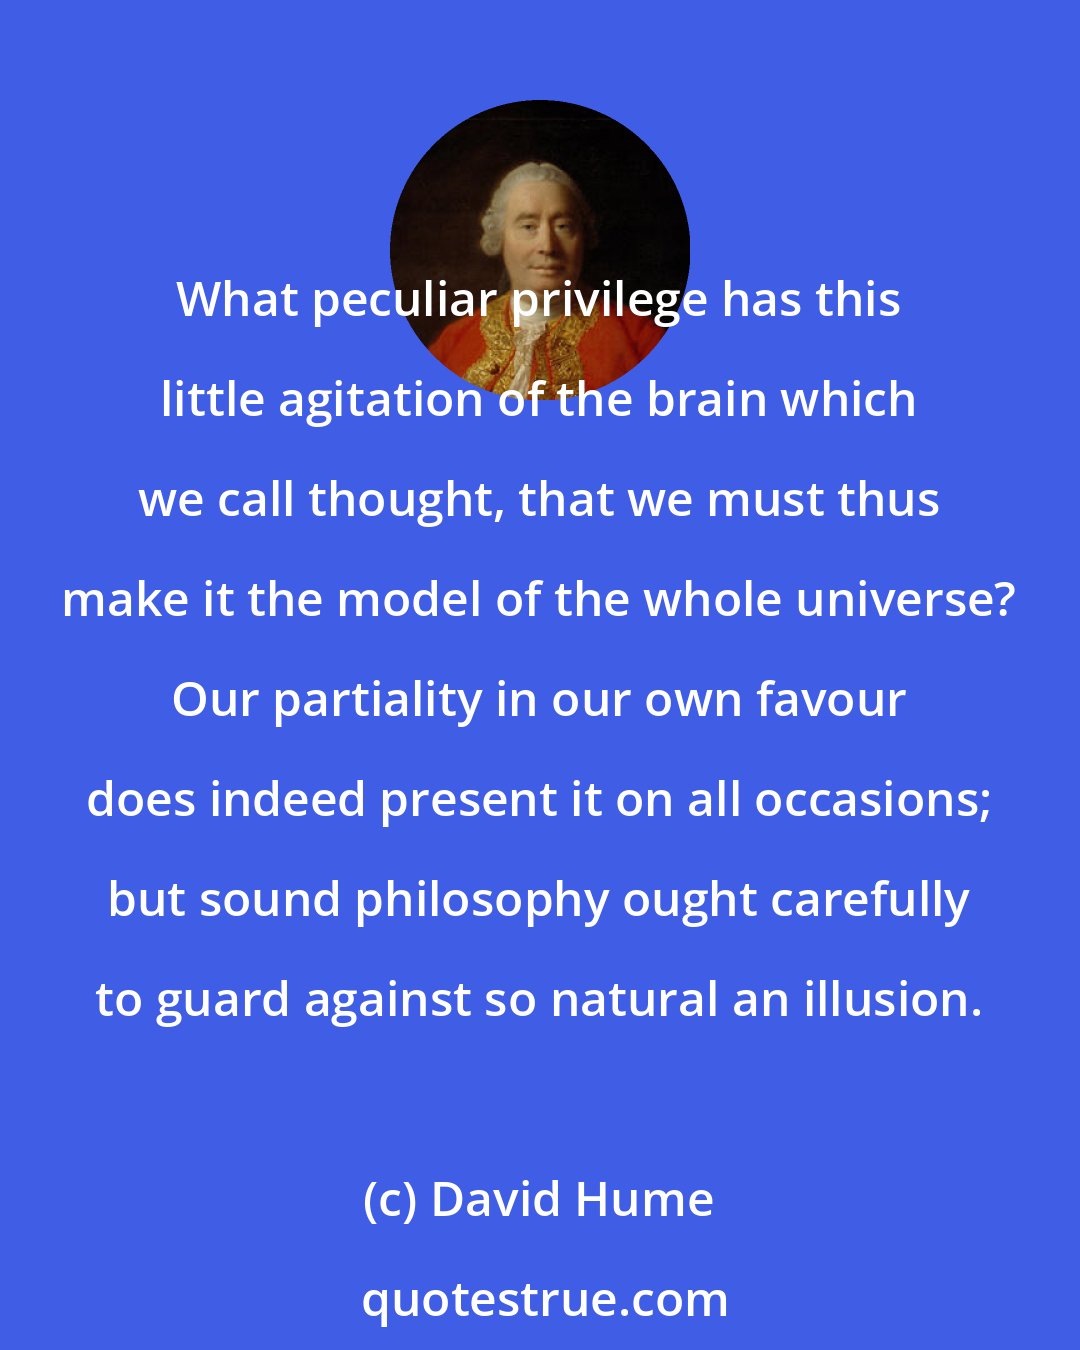 David Hume: What peculiar privilege has this little agitation of the brain which we call thought, that we must thus make it the model of the whole universe? Our partiality in our own favour does indeed present it on all occasions; but sound philosophy ought carefully to guard against so natural an illusion.